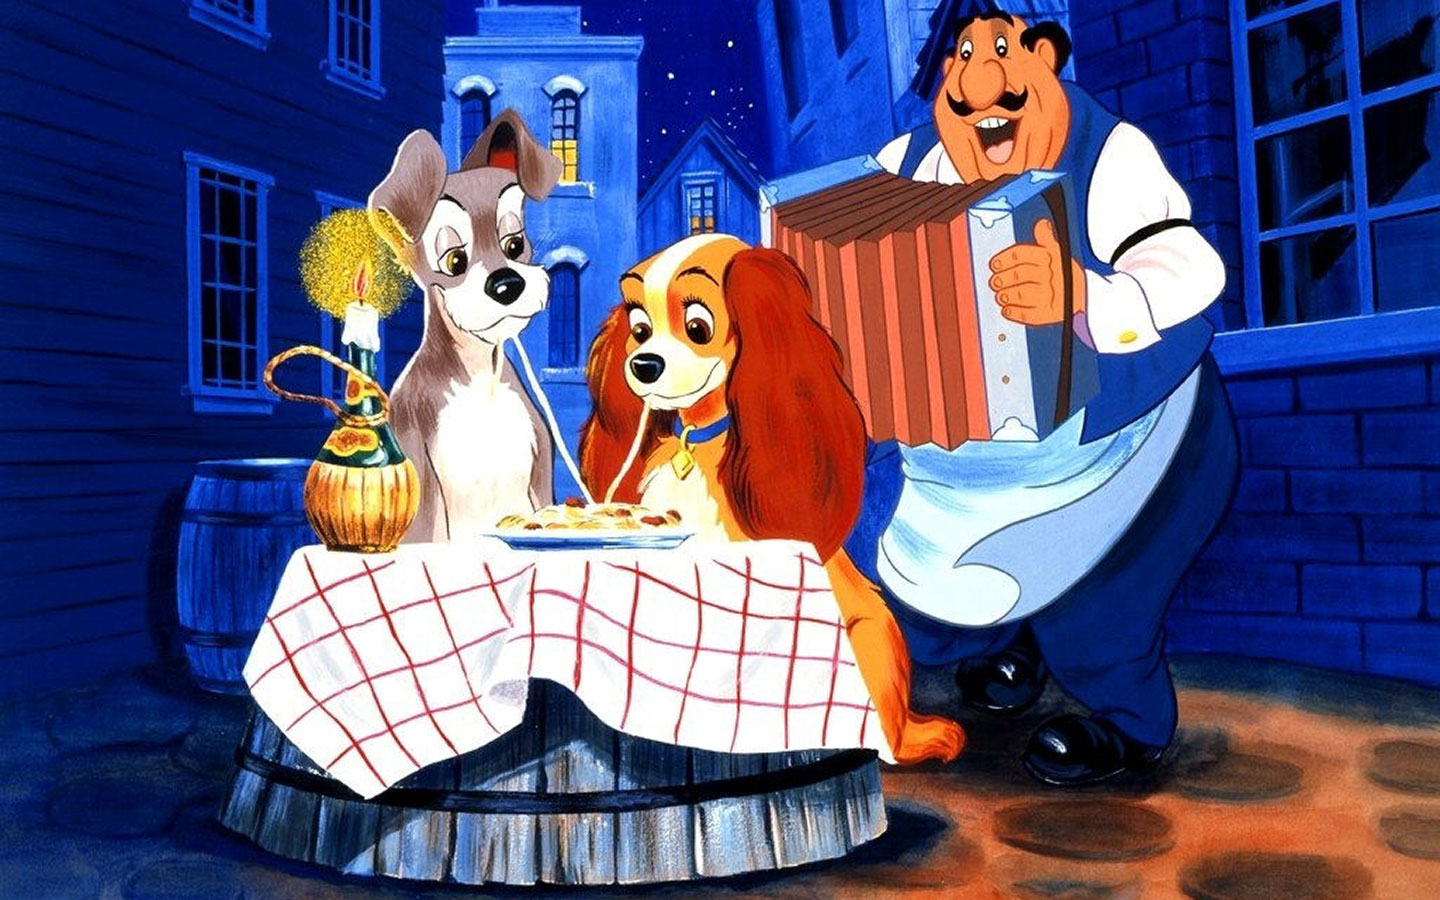 lady and the tramp (1955), movie, lady (lady and the tramp), lady and the tramp, tramp (lady and the tramp)